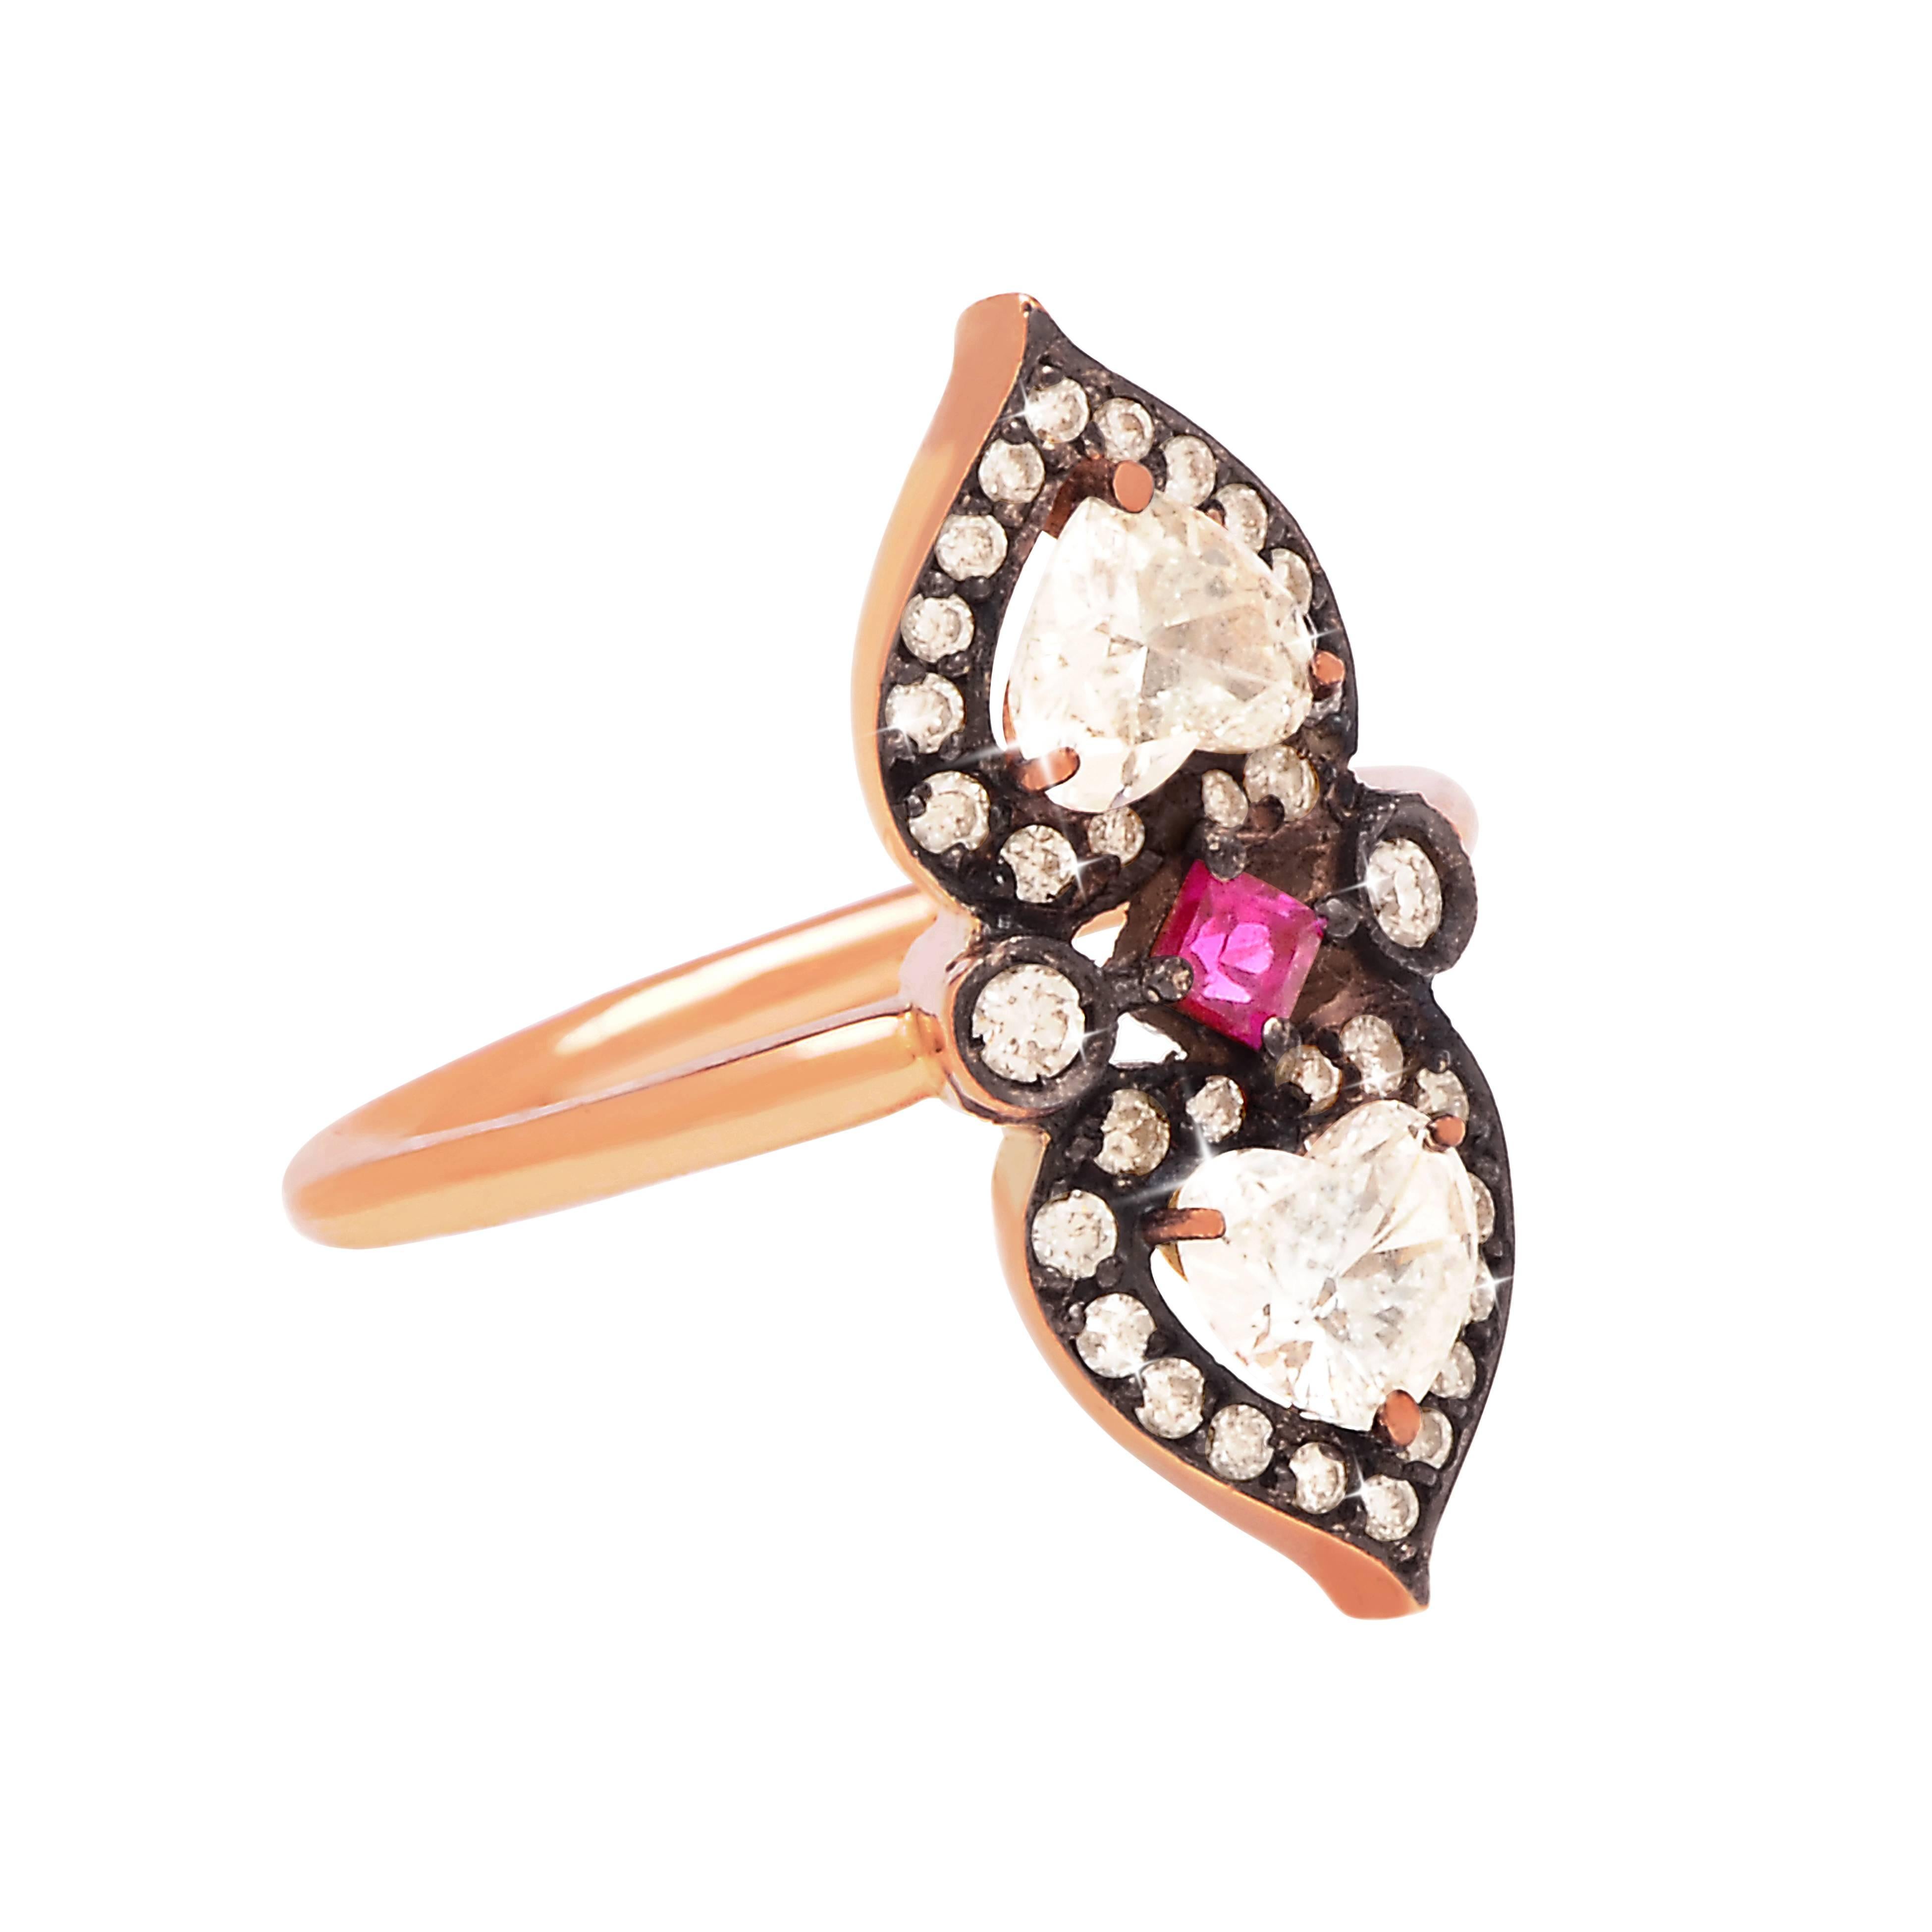 Sabine Getty ‘Heart to Heart’ ring in 18k rose gold set with two heart shaped diamonds and a ruby
Diamond: 0,71 Ruby: 0,08

Available in sizes 47 and 46.5 - can be re-sized.

Relic was the debut collection by Sabine Getty launched in September